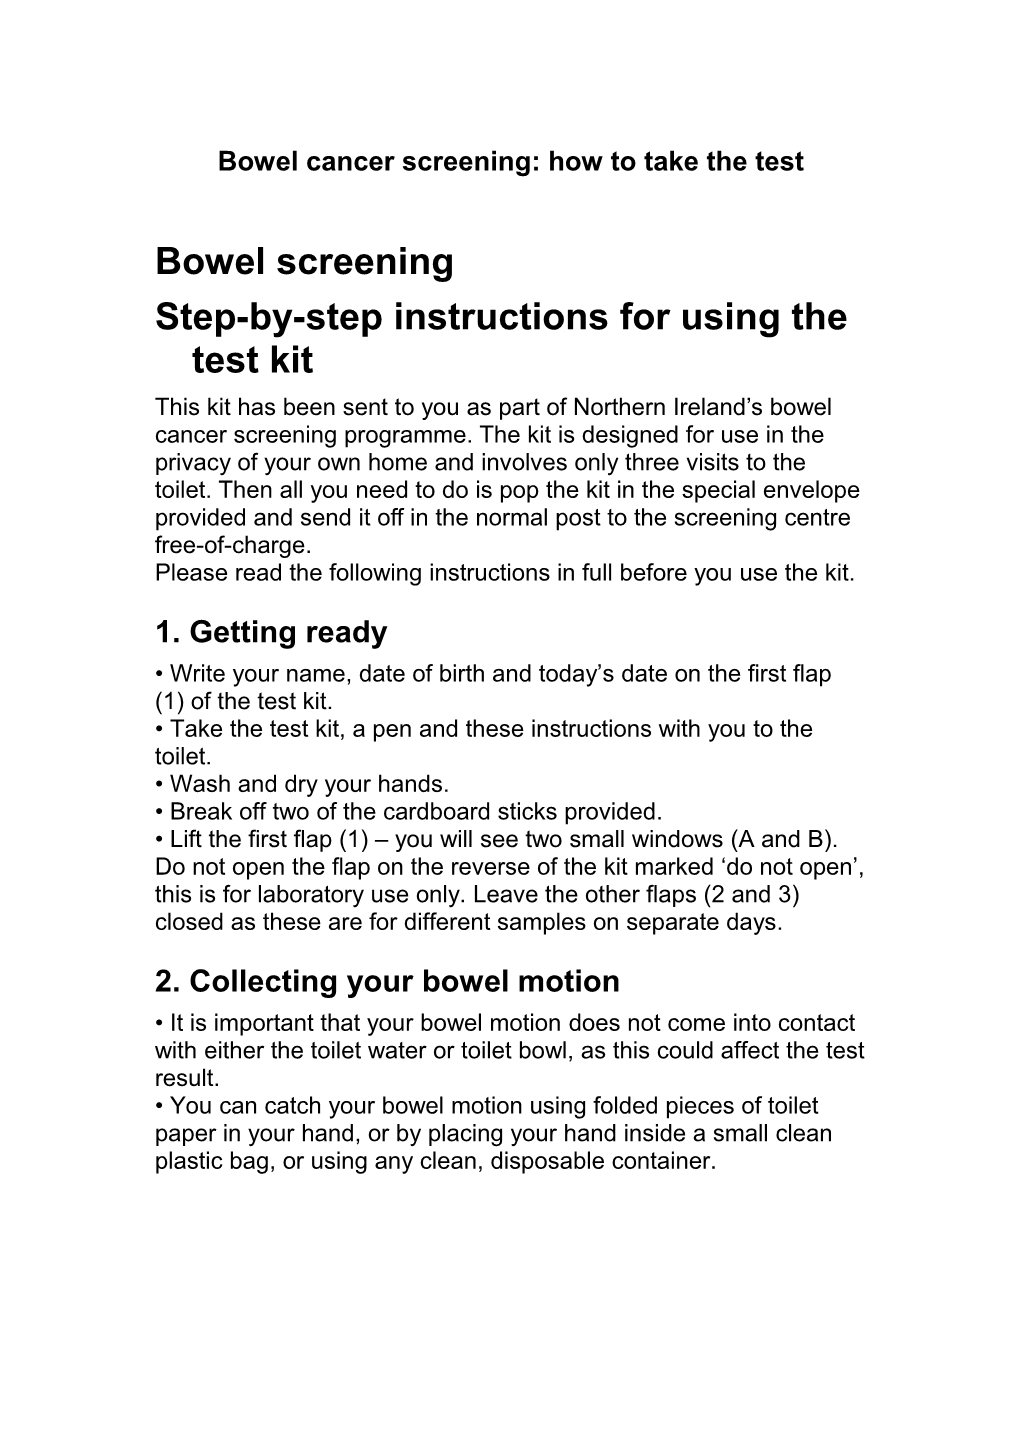 Bowel Cancer Screening: How to Take the Test